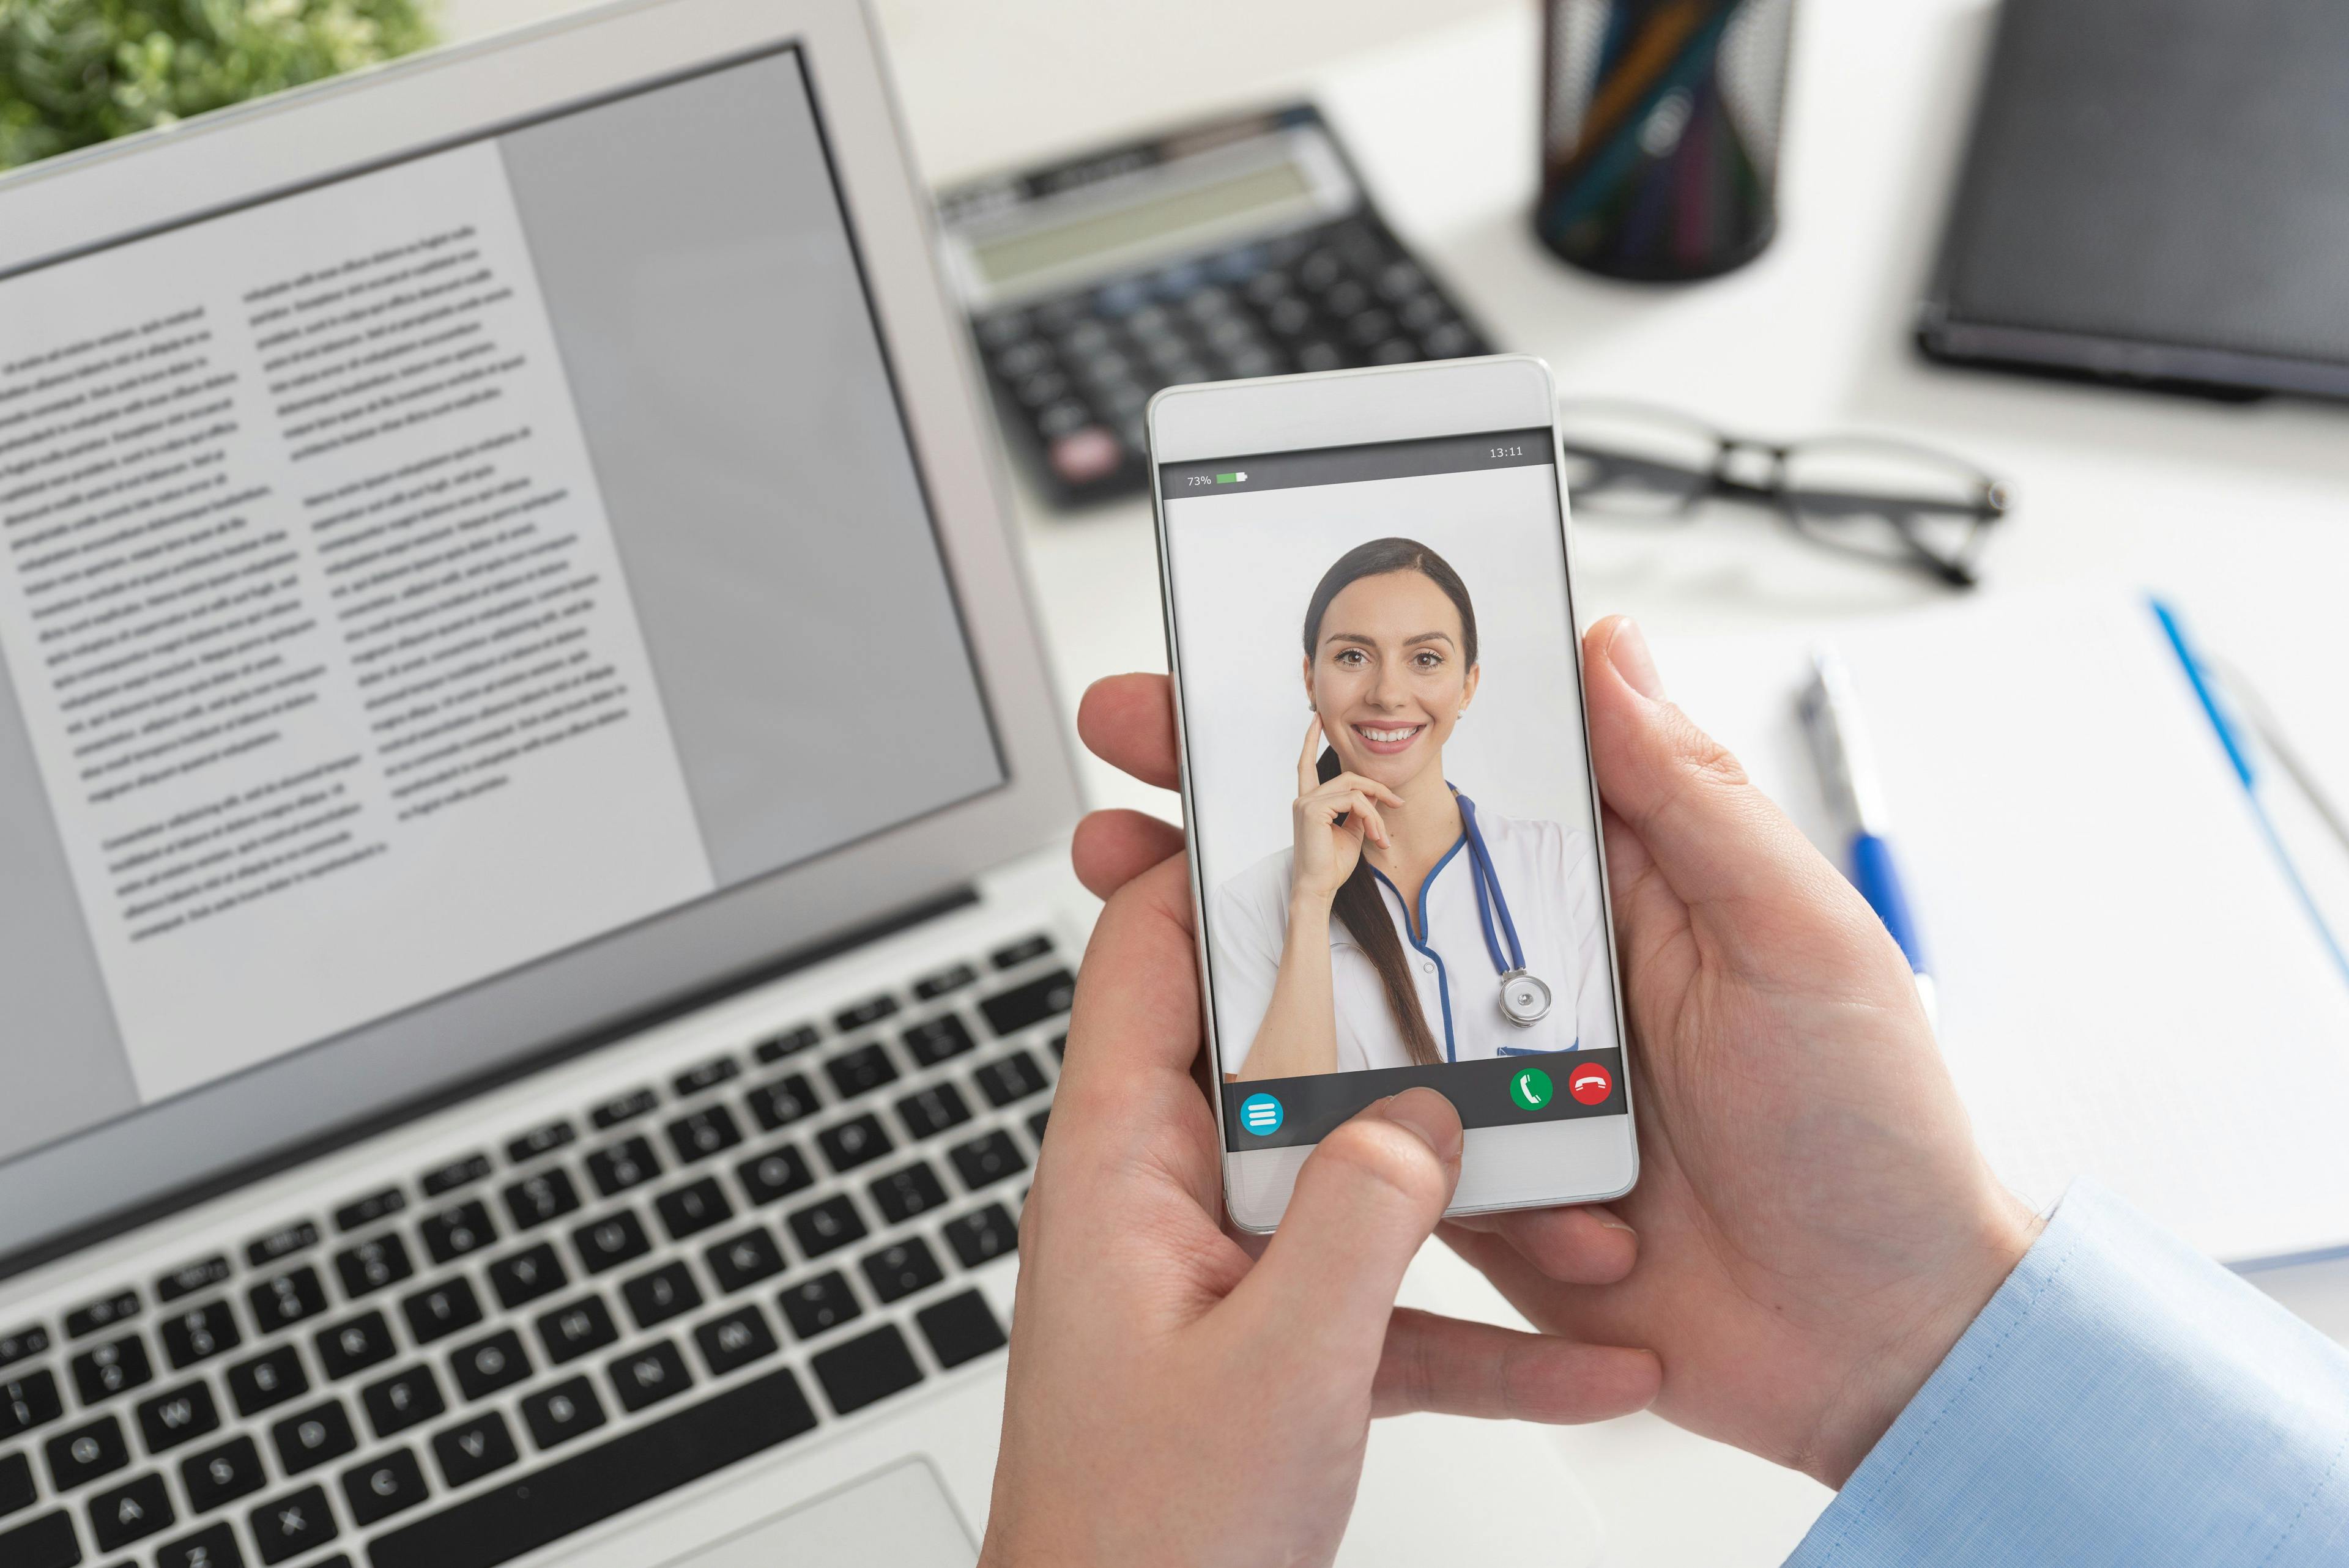 Physicians continue using telehealth, will use more in future